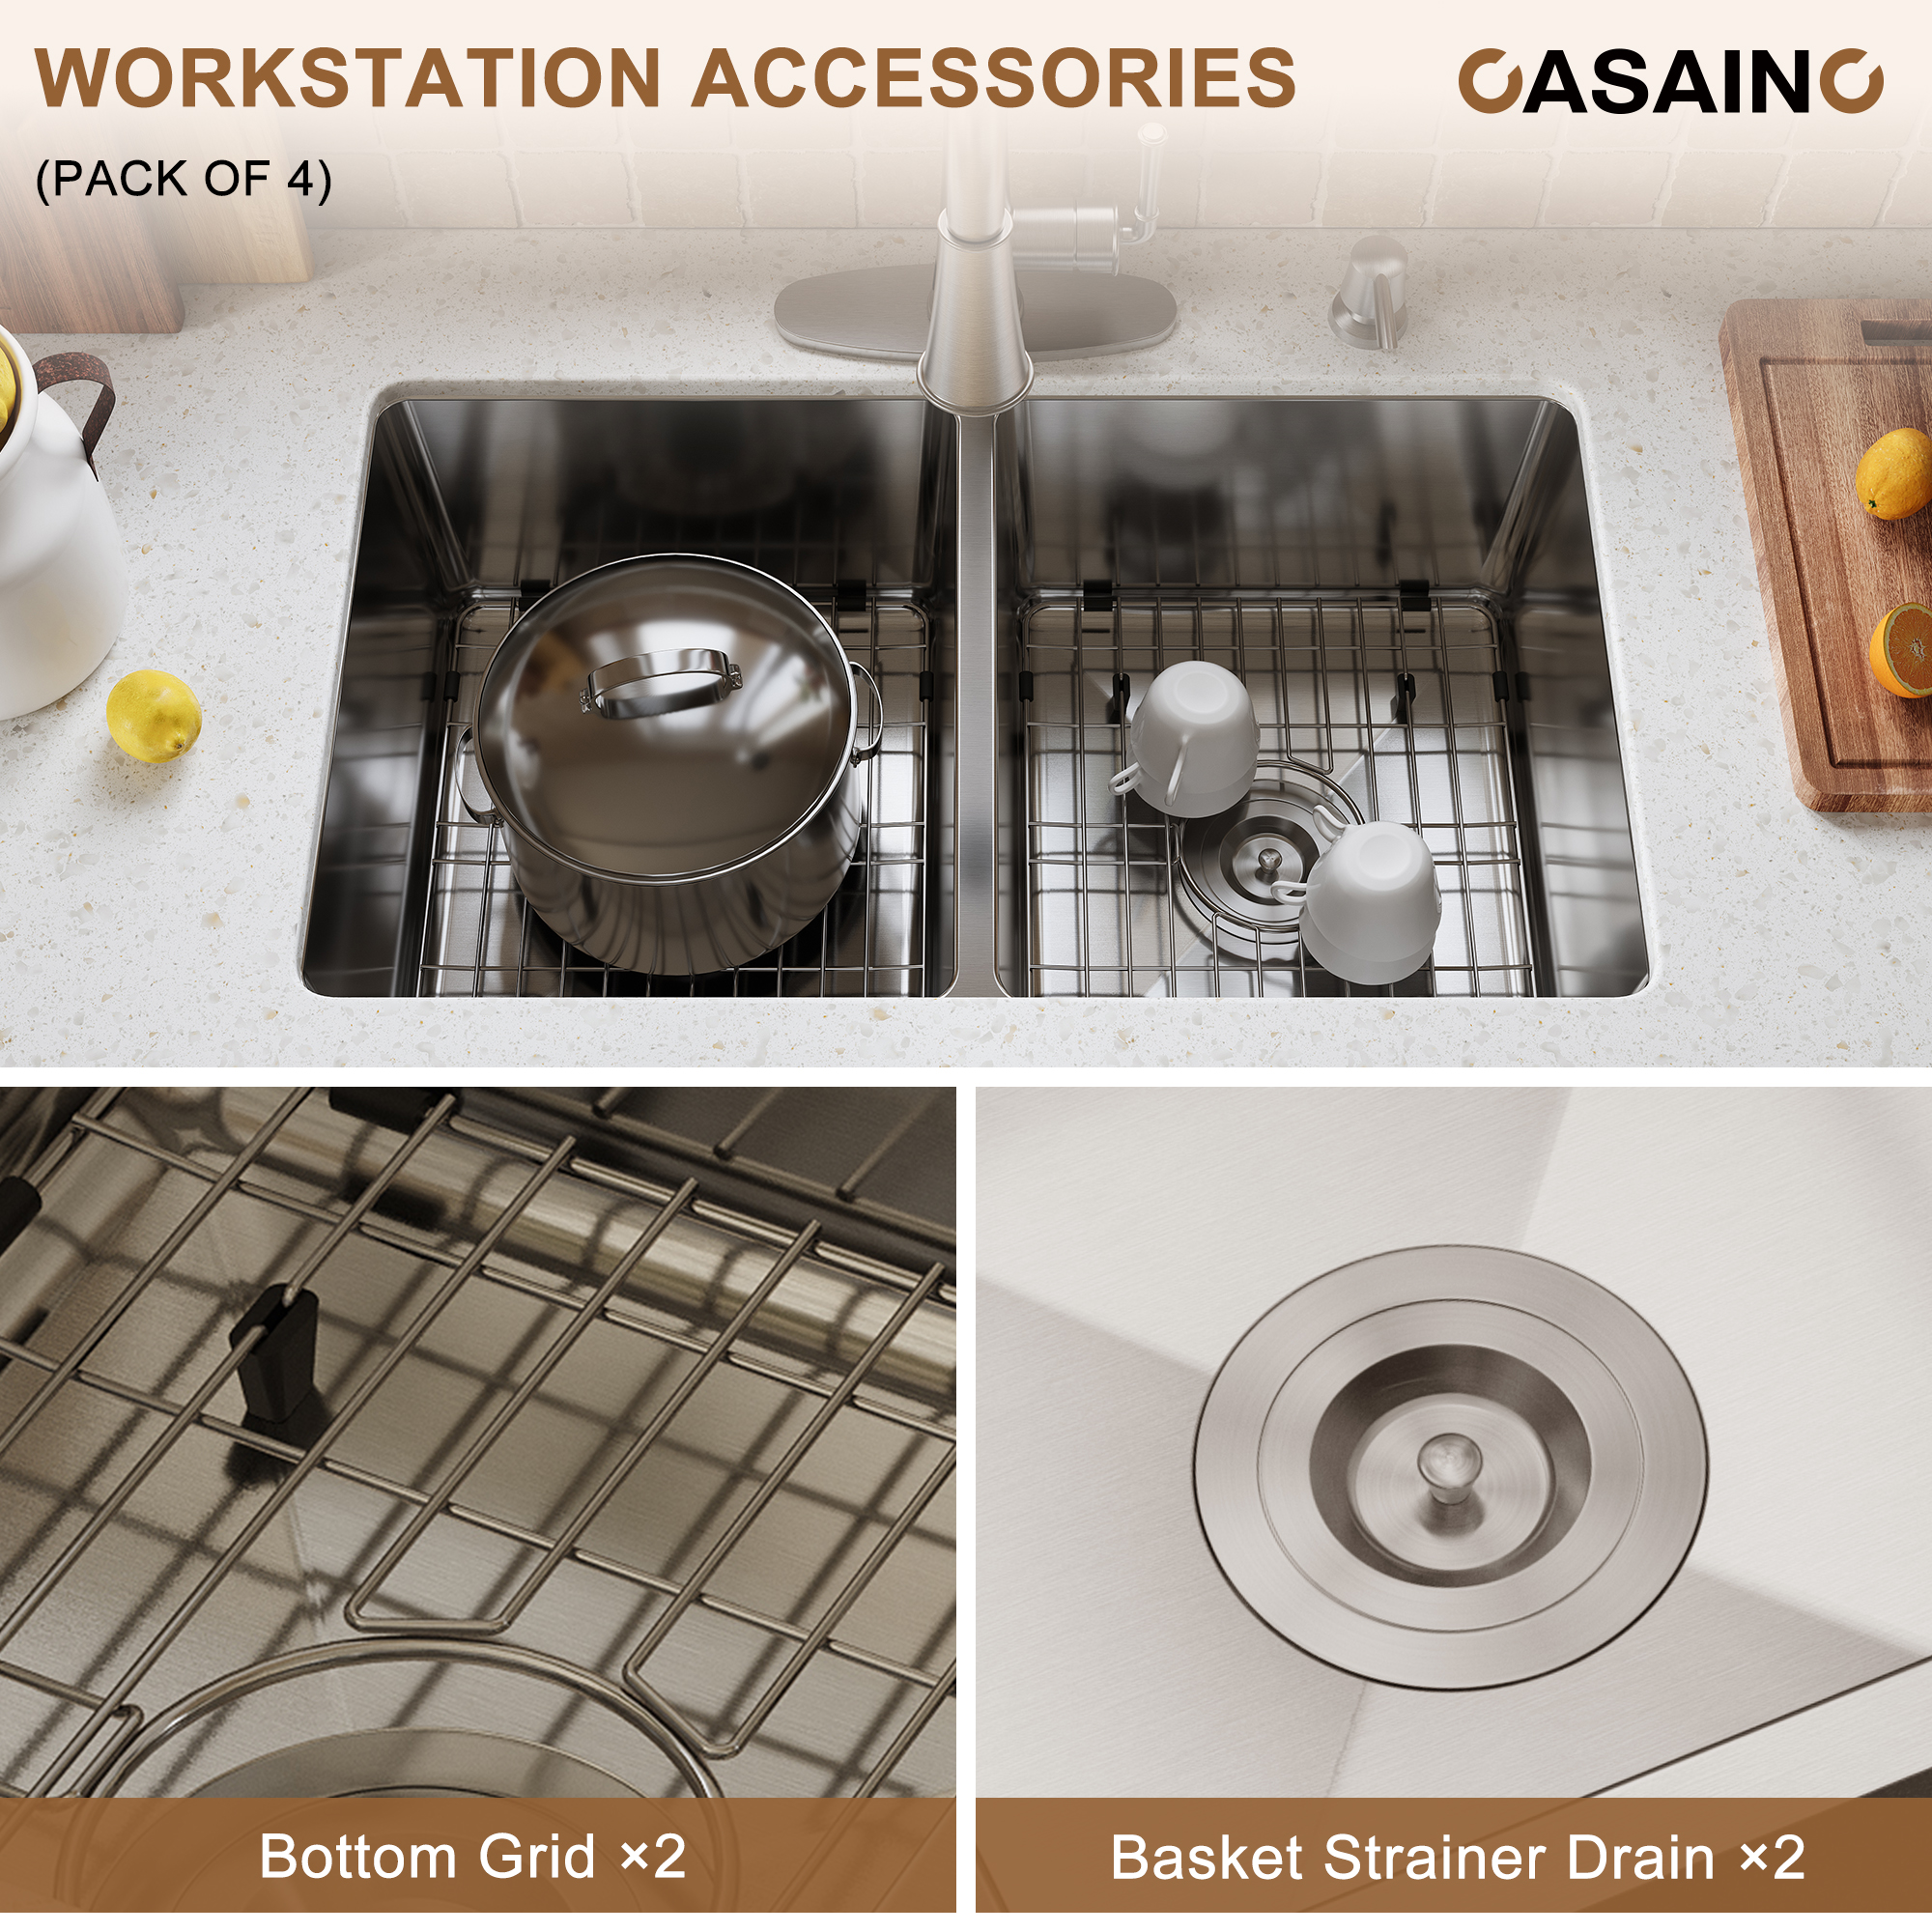 CASAINC 32 in. Undermount Double Bowl 18 Gauge Brushed Stainless Steel Kitchen Sink with Bottom Grid and Basket Strainer